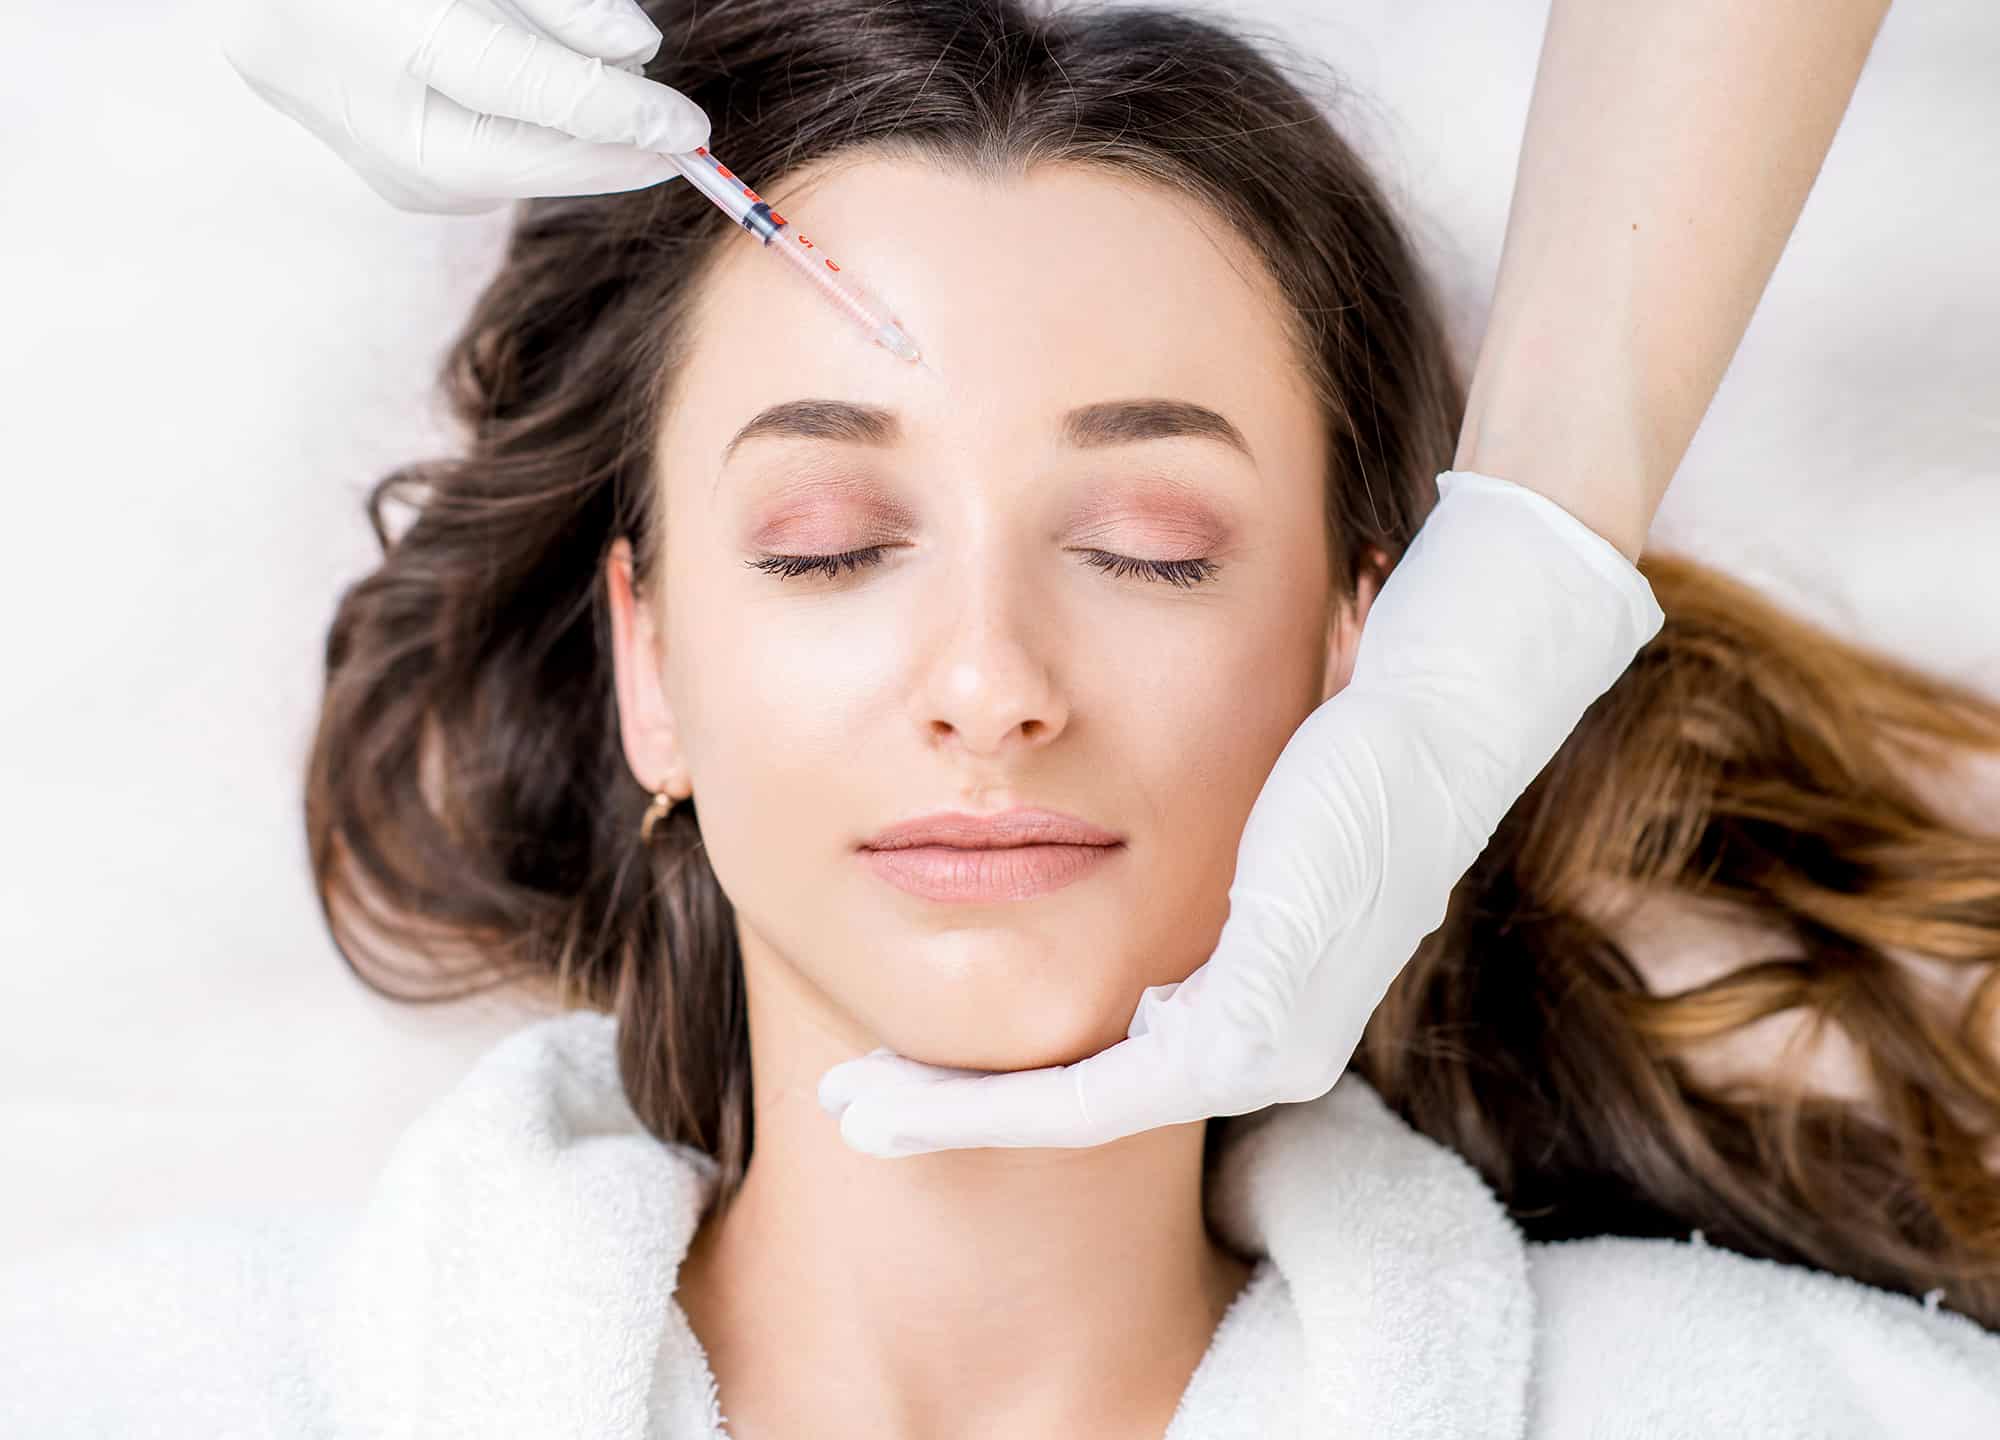 Same Day Aesthetic Treatment Combinations to Avoid | RealSelf News